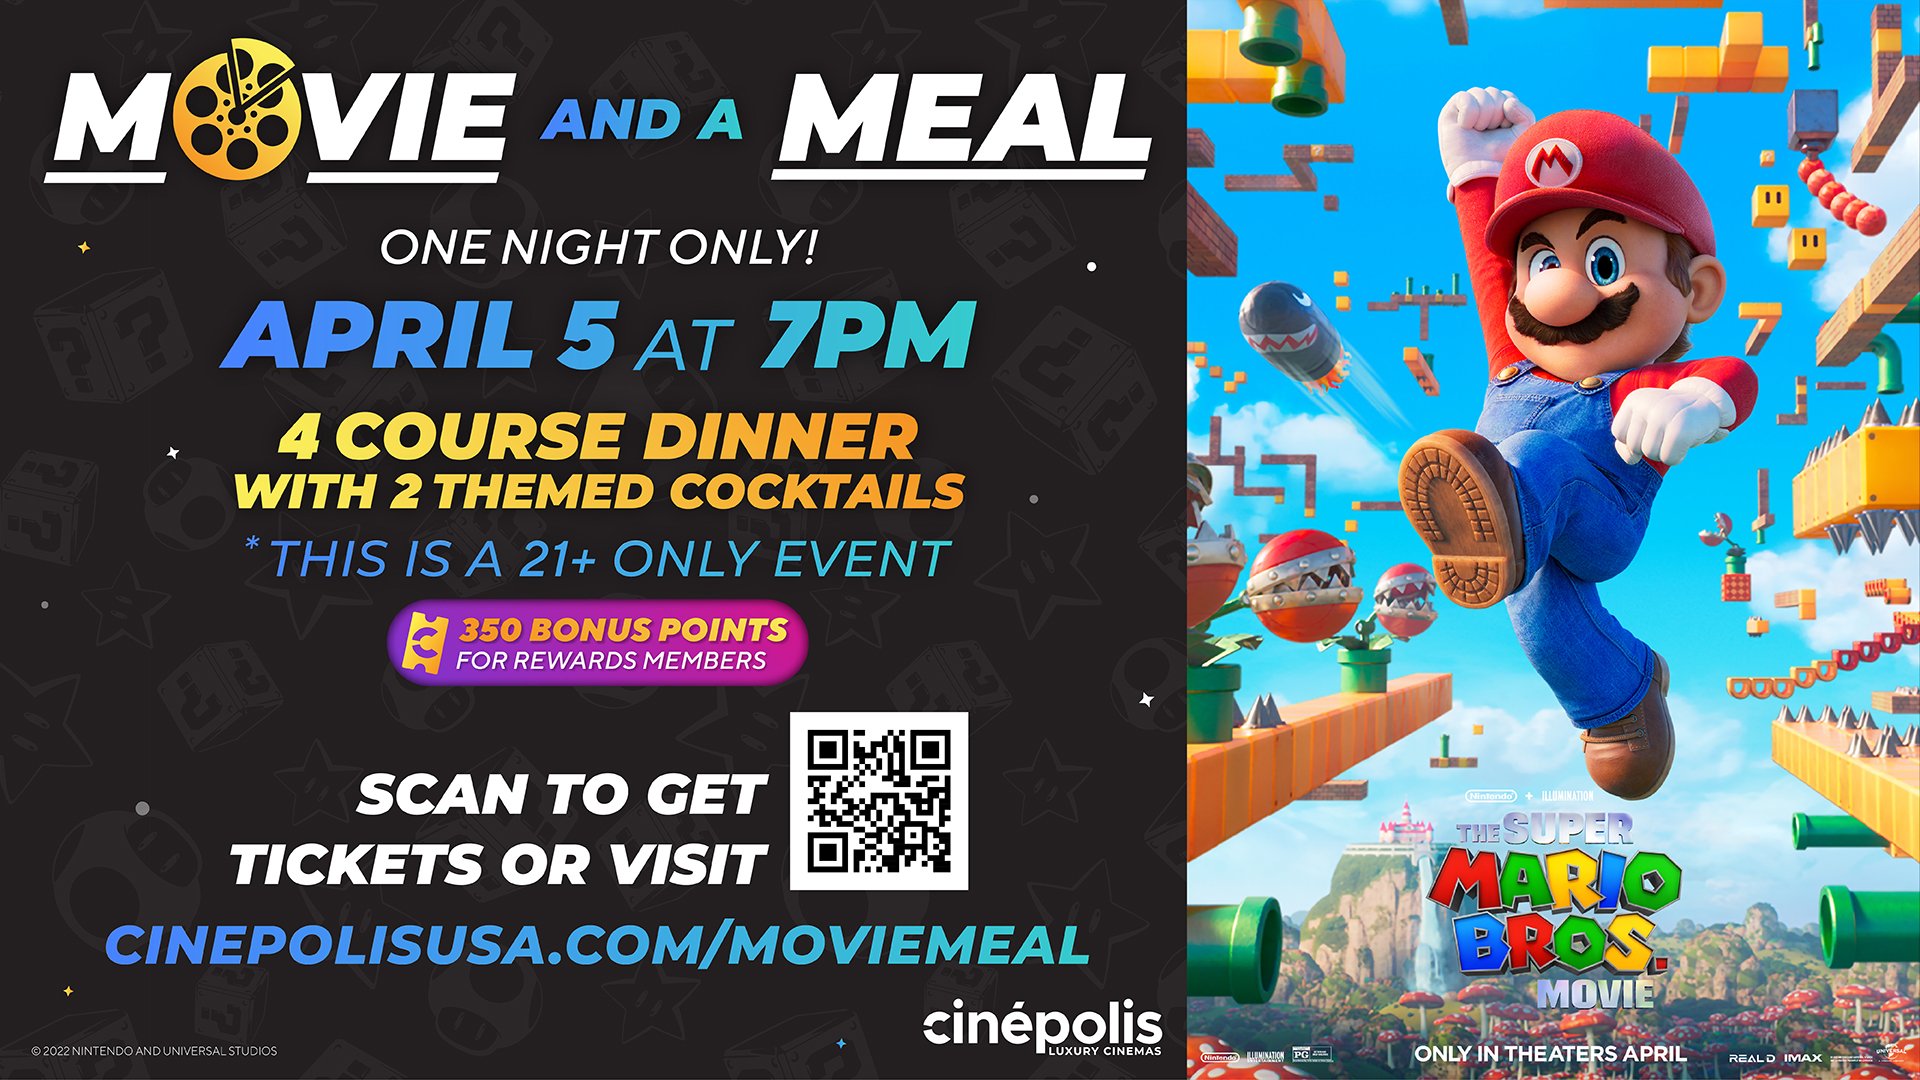 The Super Mario Bros Movie Movie Party and a Meal at Cinepolis 